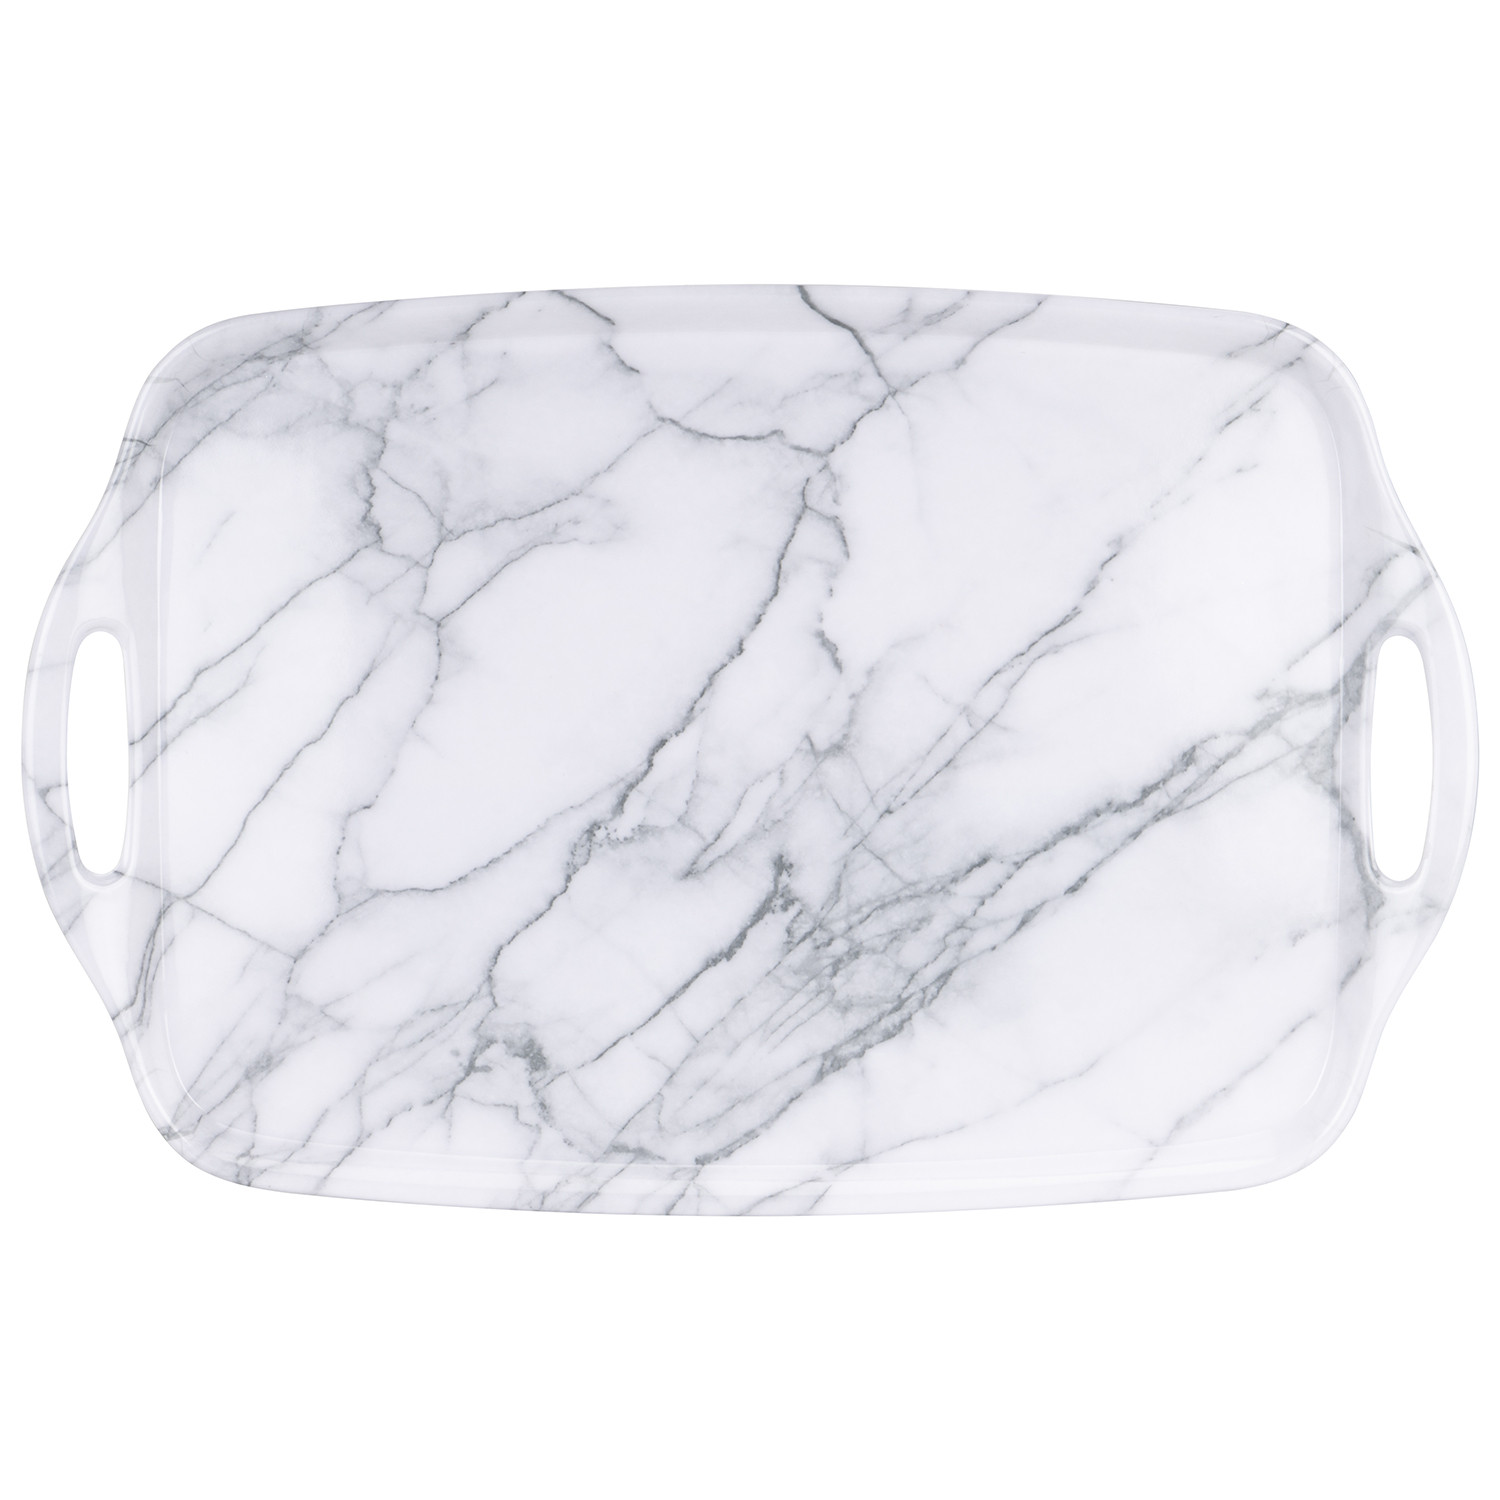 White Marble Large Serving Tray Image